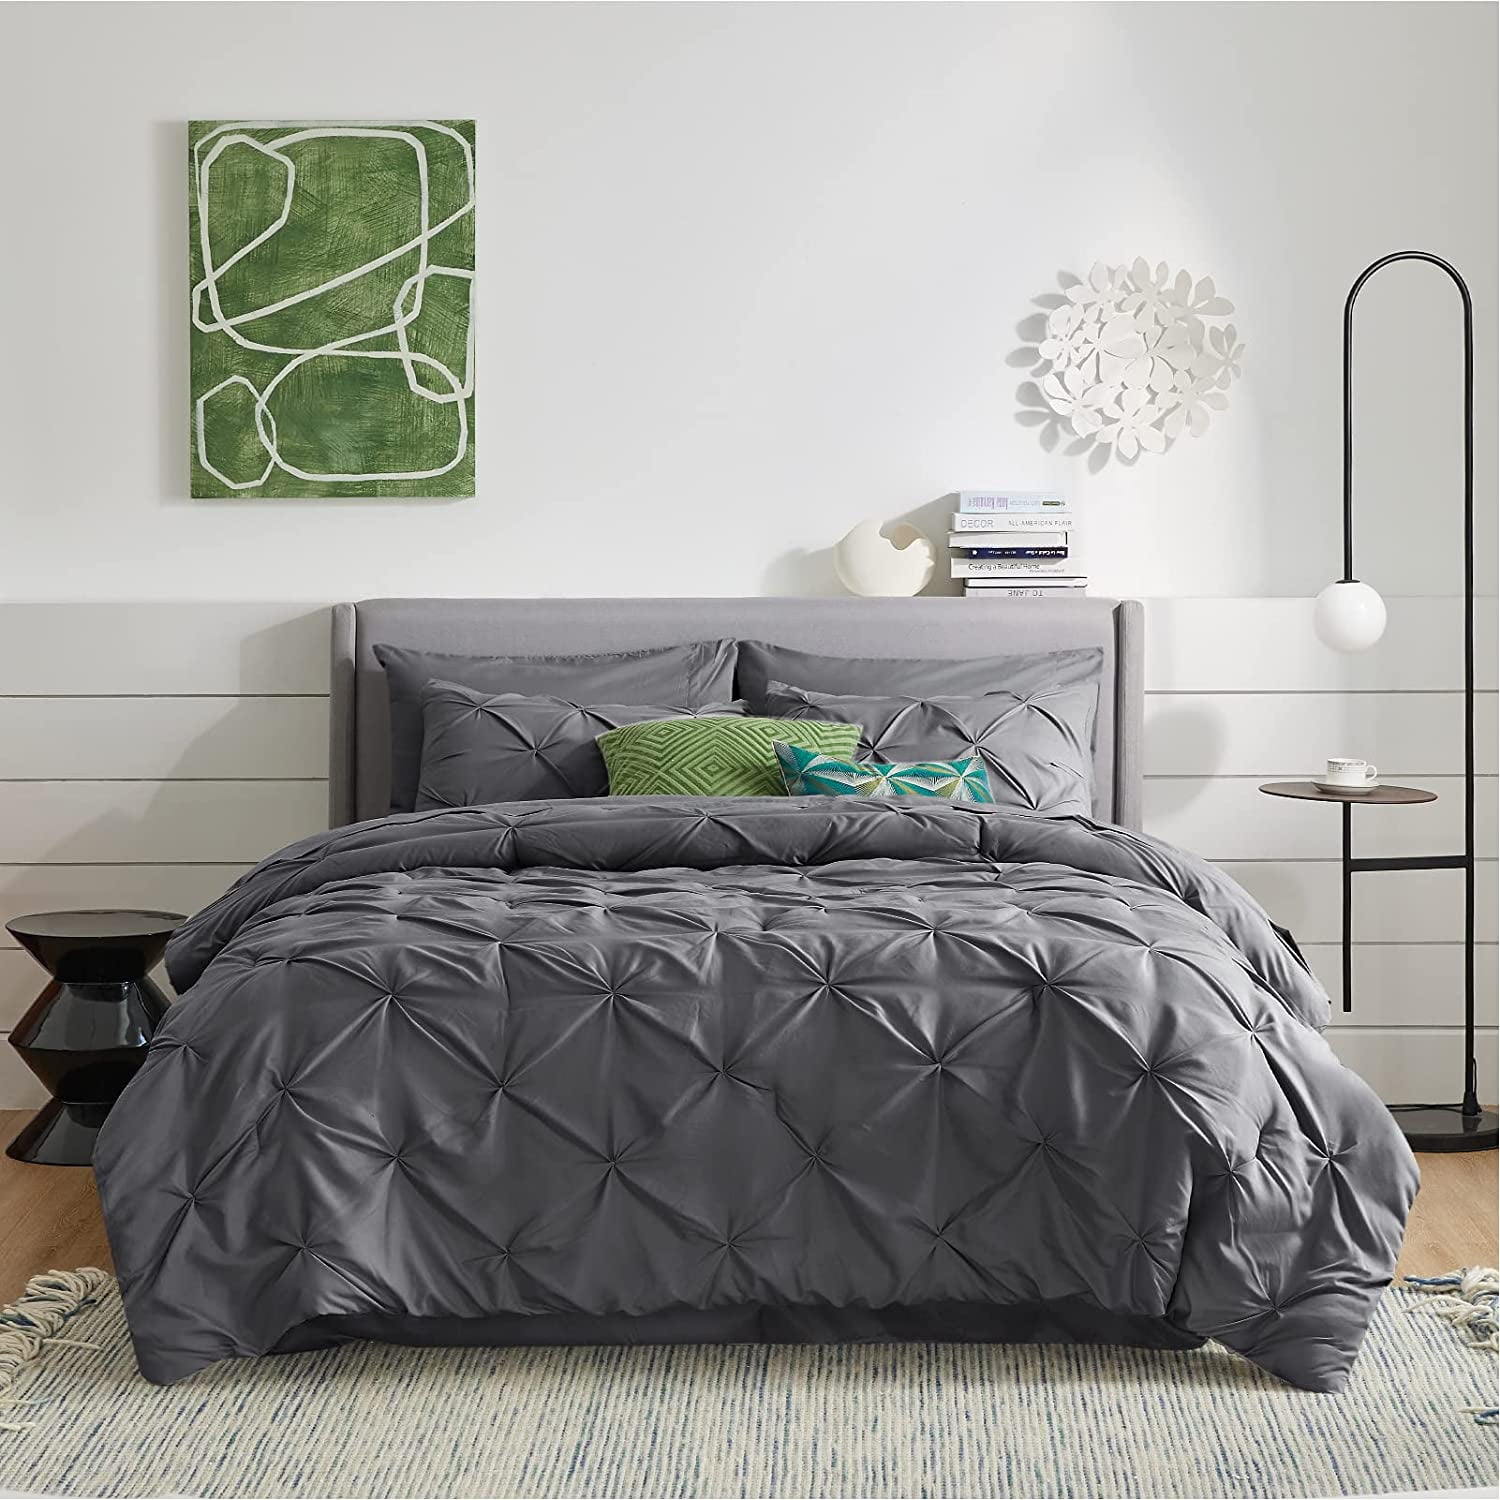 Maple&Stone Queen Comforter Set 7 Pieces Pinch Pleat Bed in A Bag, Grey  Comforter Queen Sets Pintuck with Comforter Sheets Pillowcases & Shams,  Gray